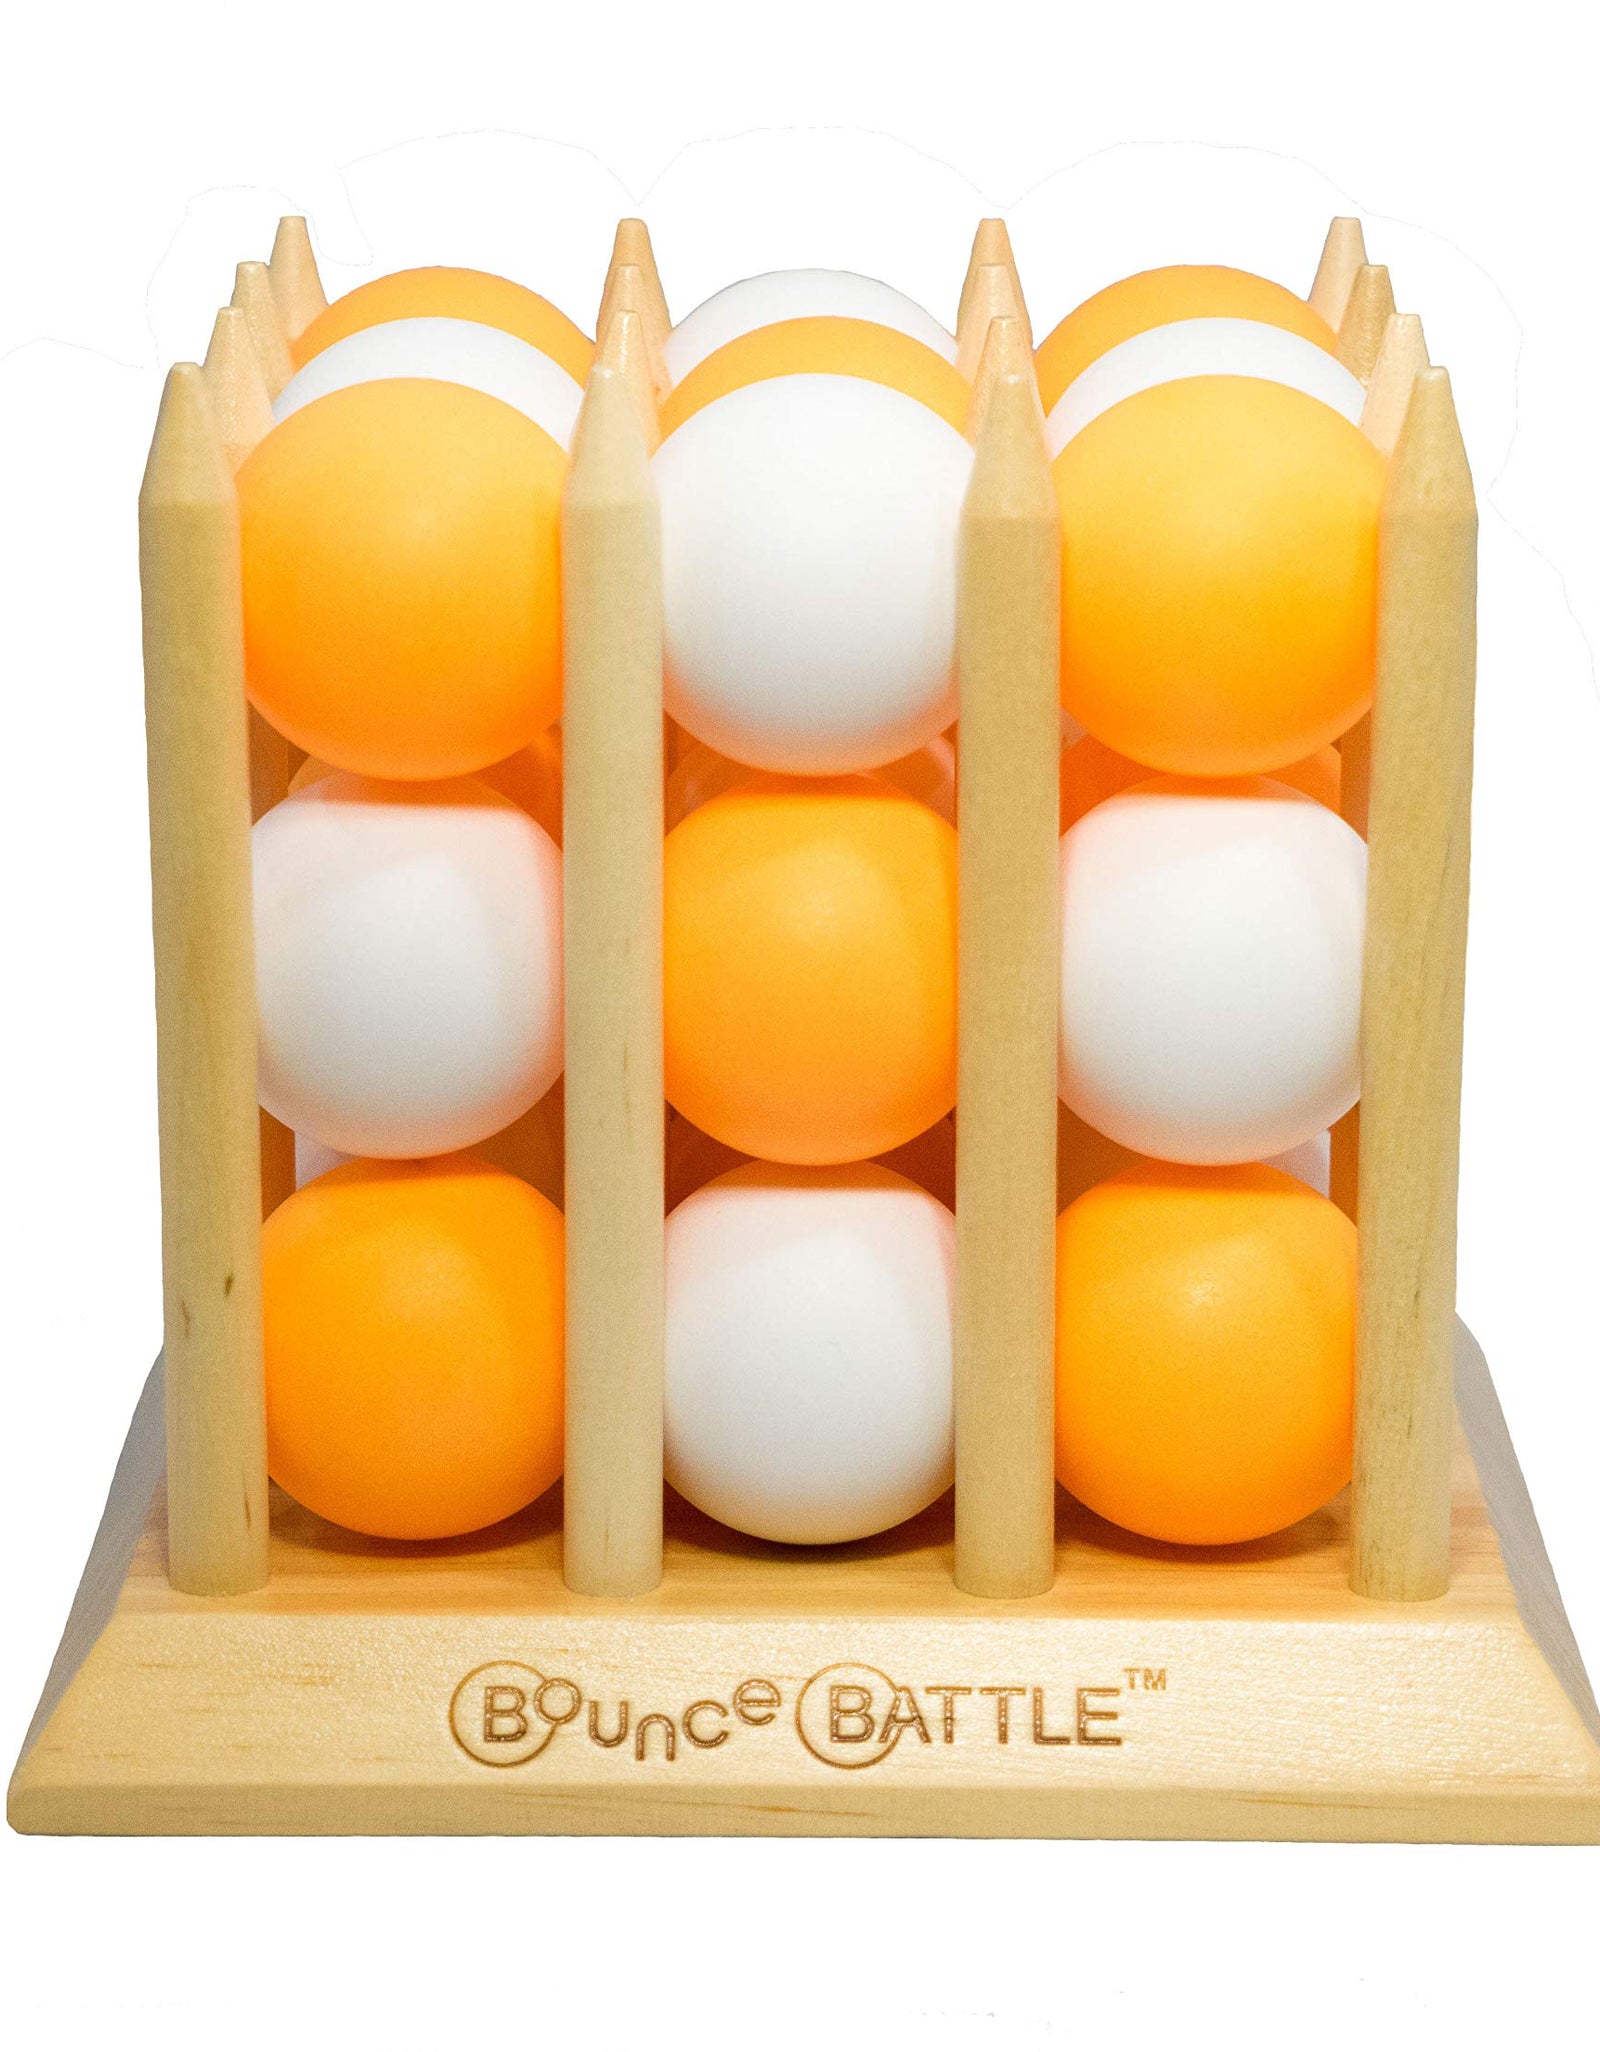 Bounce Battle Wood Edition Game Set - an Addictive Game of Strategy, Skill & Chance